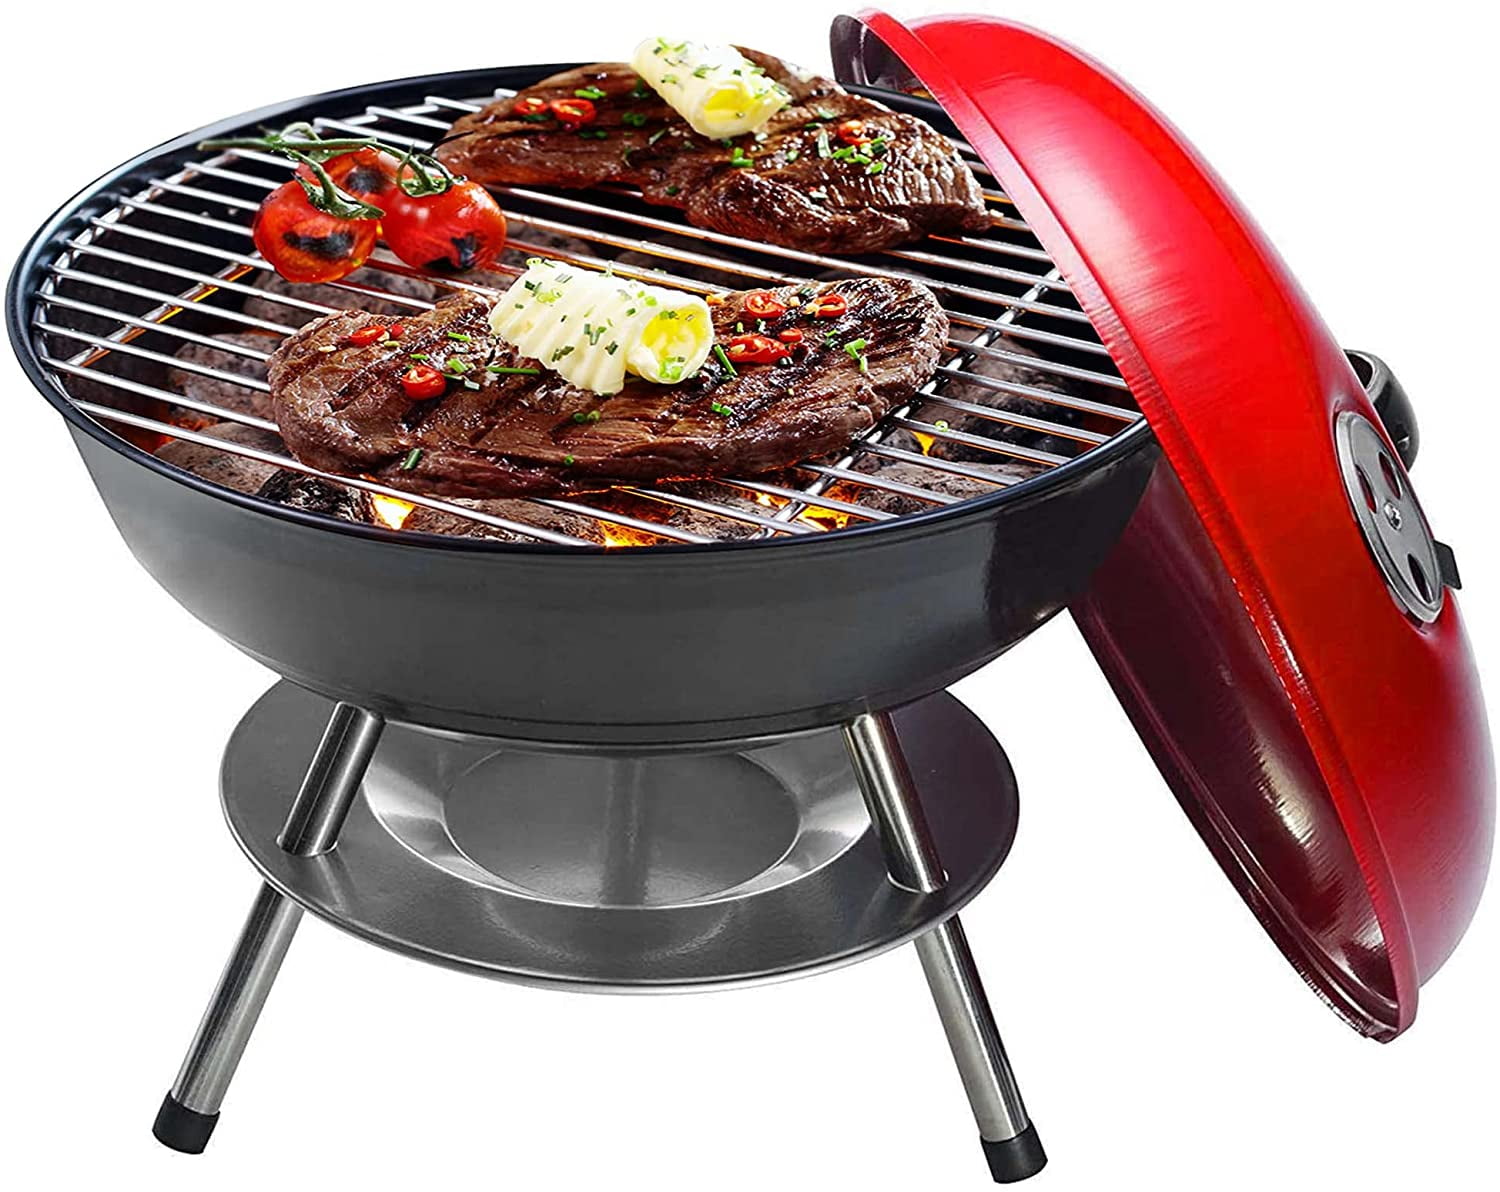 14 Inch Portable Kettle Charcoal BBQ Grill / Kettle Barbecue - Red 